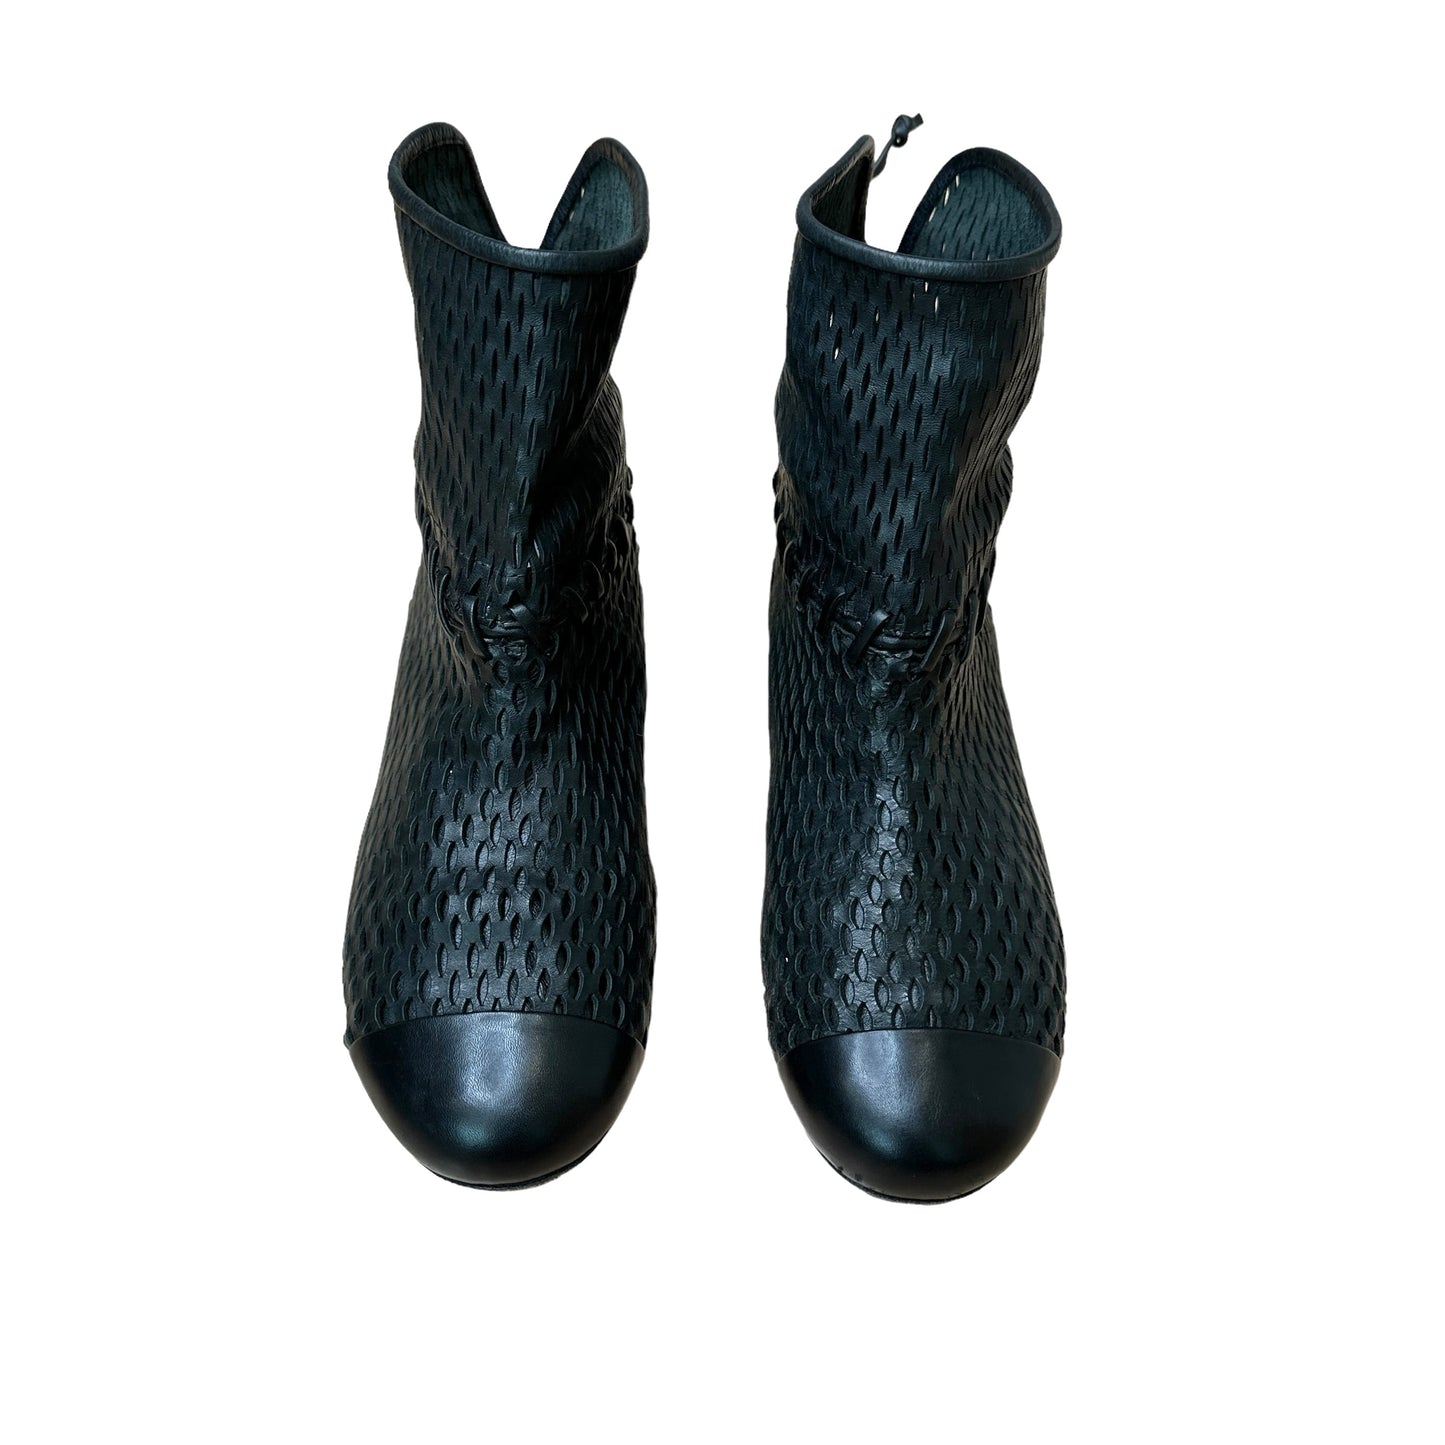 Black Low Boots - 7.5